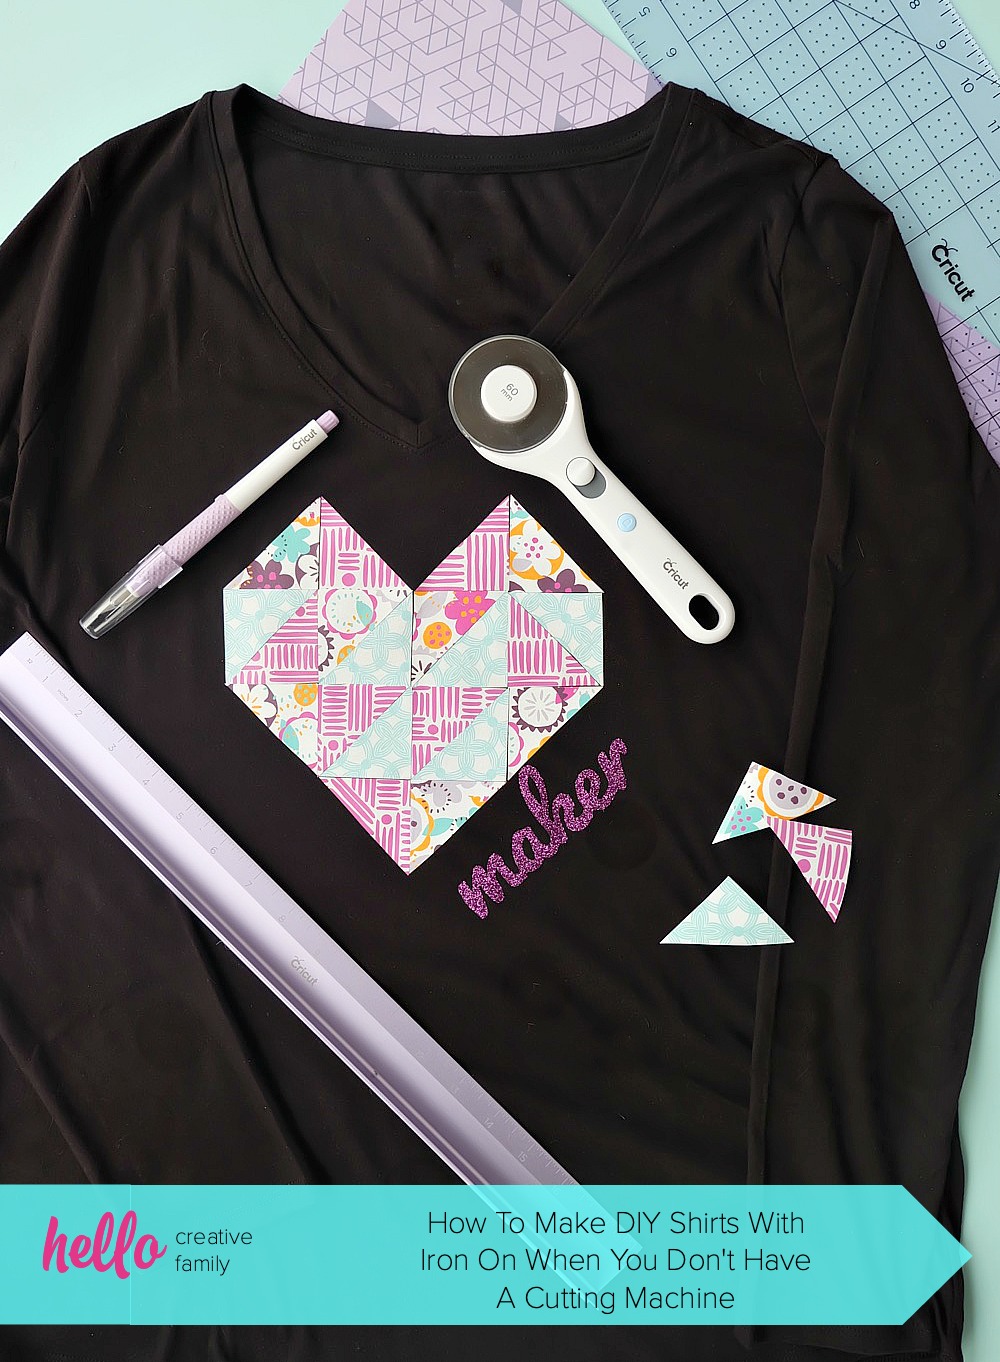 Learn how to make DIY Shirts with Iron On HTV even if you don't have a cutting machine! We share how to make a hand lettered iron on applique as well as a geometric heart design cutting by hand! #CricutMade #DIYShirts #Sponsored #Cricut #HTV